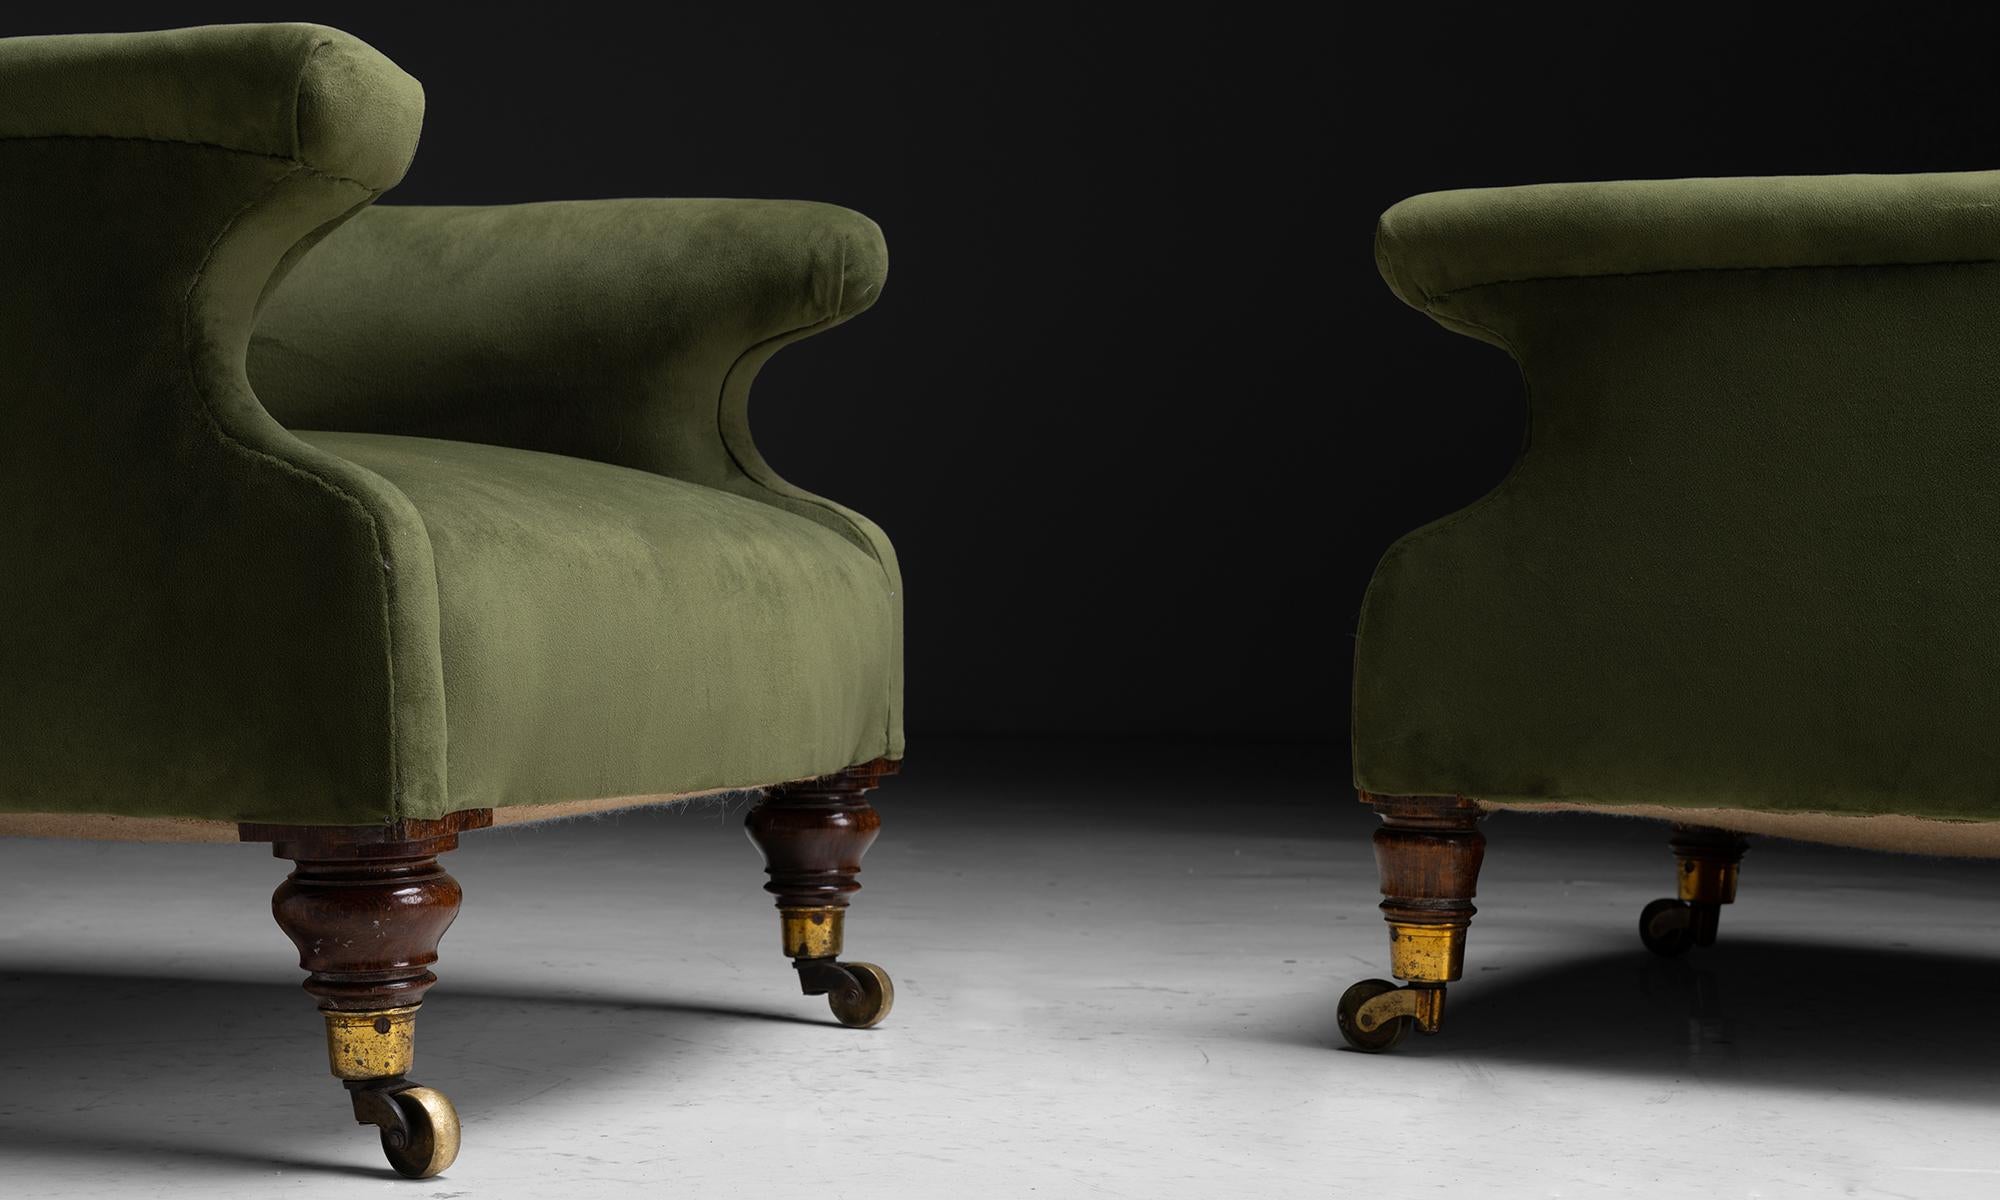 20th Century Pair of Library Chairs in Velvet, England, circa 1910